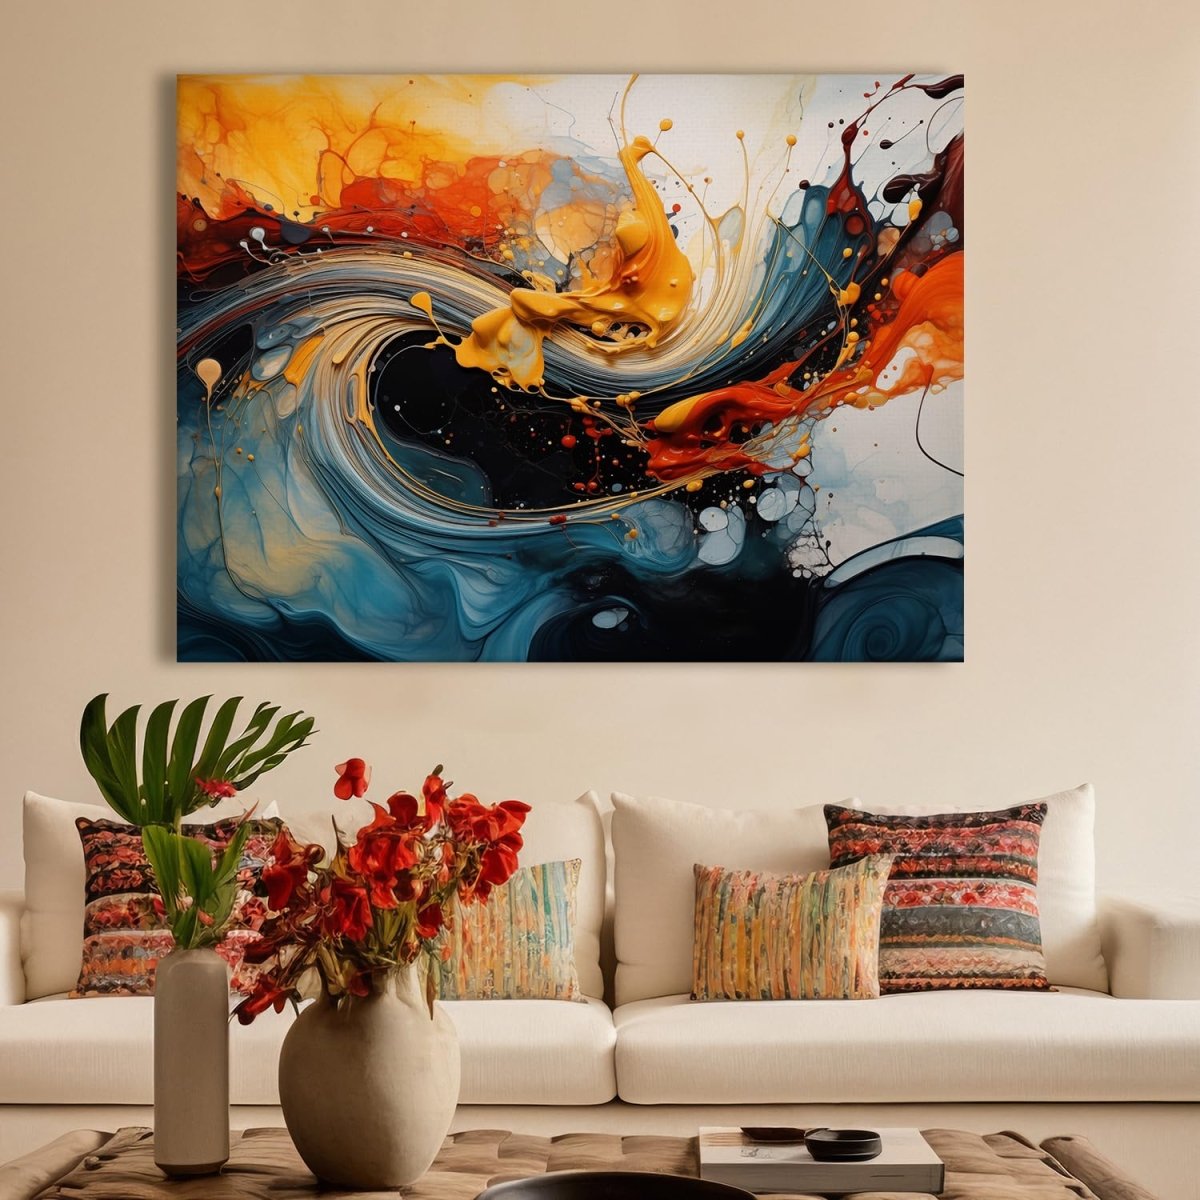 Yin and Yang Abstract Canvas Wall Art (48 x 36 Inches)